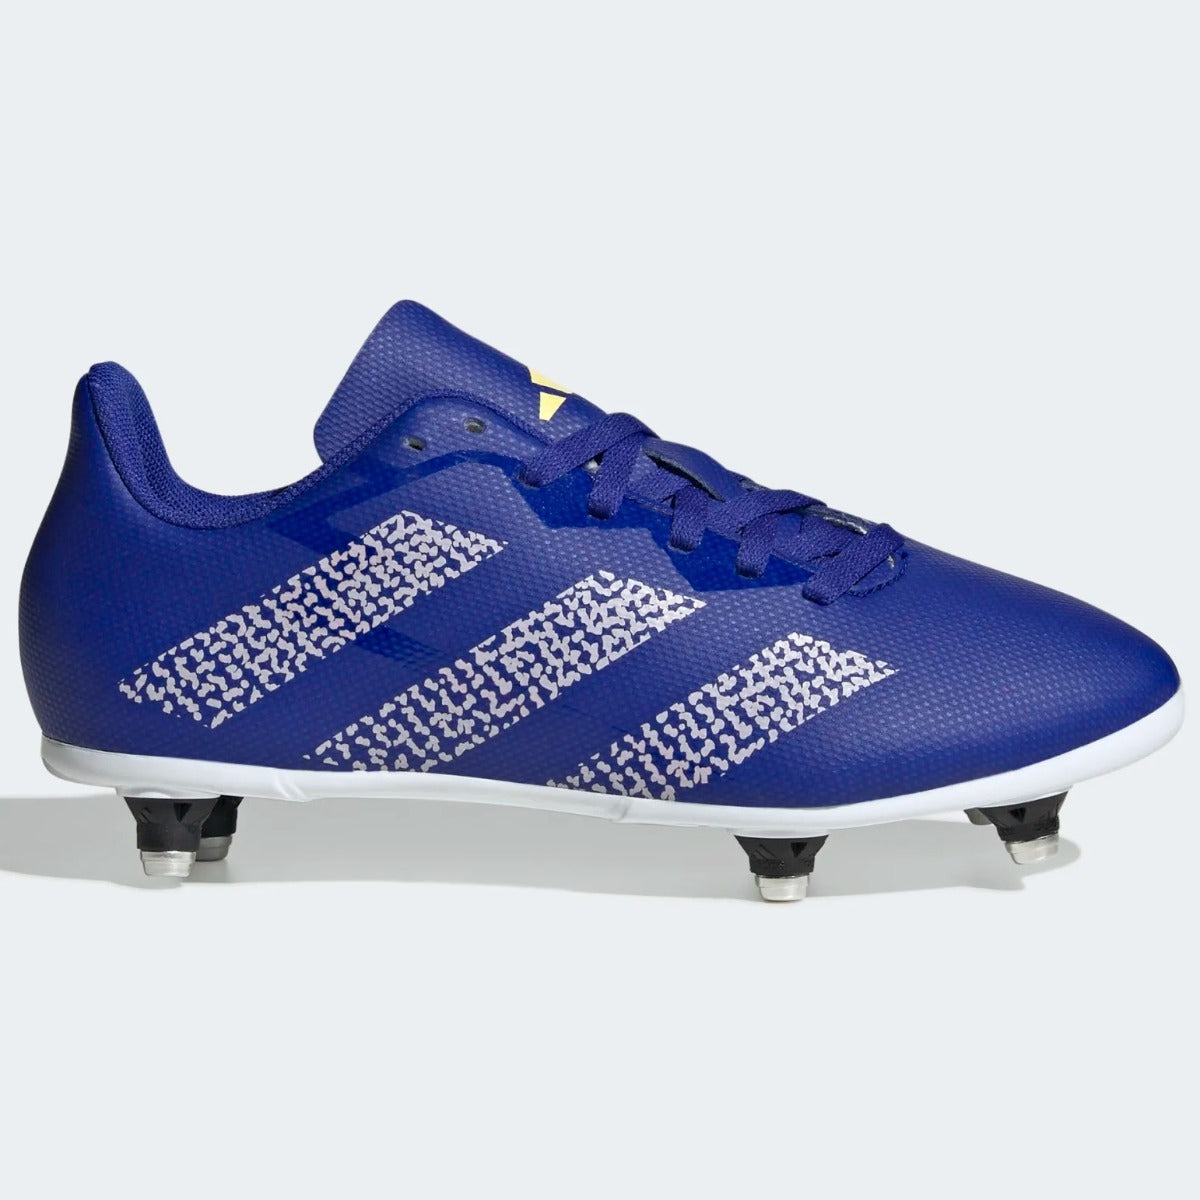 Adidas Rugby Junior SG Rugby Boots Junior (Lucid Blue HQ3523)